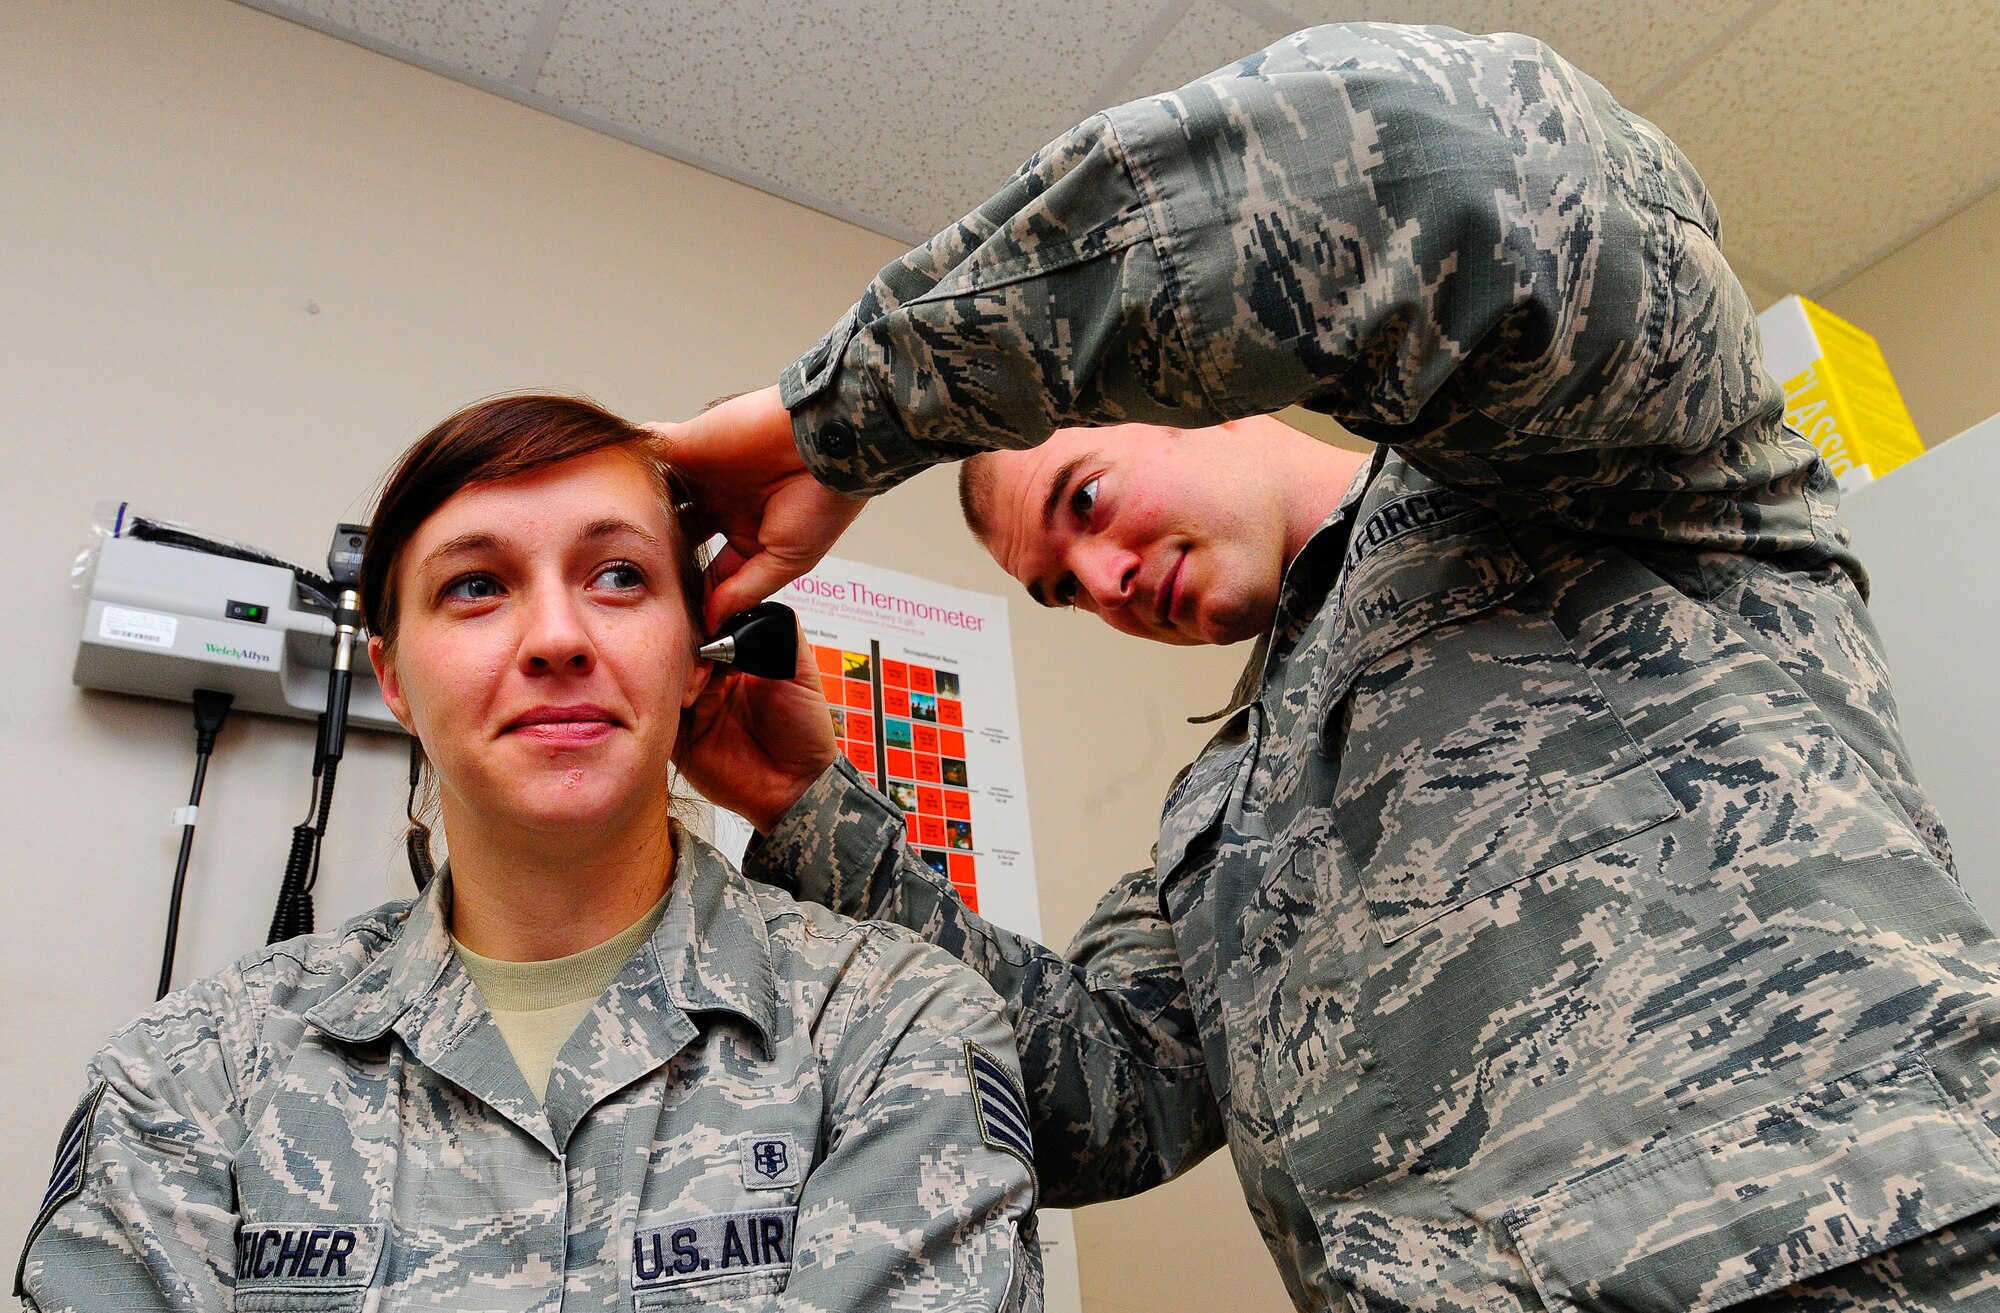 Senior Airman Jonathon Broy, 1st Special Operations Medical Operations Squadron occupational health technician, looks into 1st Special Operations Medical Squadron occupational health technician Staff Sgt. Jillian Botteicher’s ear on Hurlburt Field, Fla., Jan. 14, 2015. Broy checks patients’ ears to ensure there are no injuries to the autonomy of their ear canals. (U.S. Air Force photo/Airman 1st Class Andrea Posey)